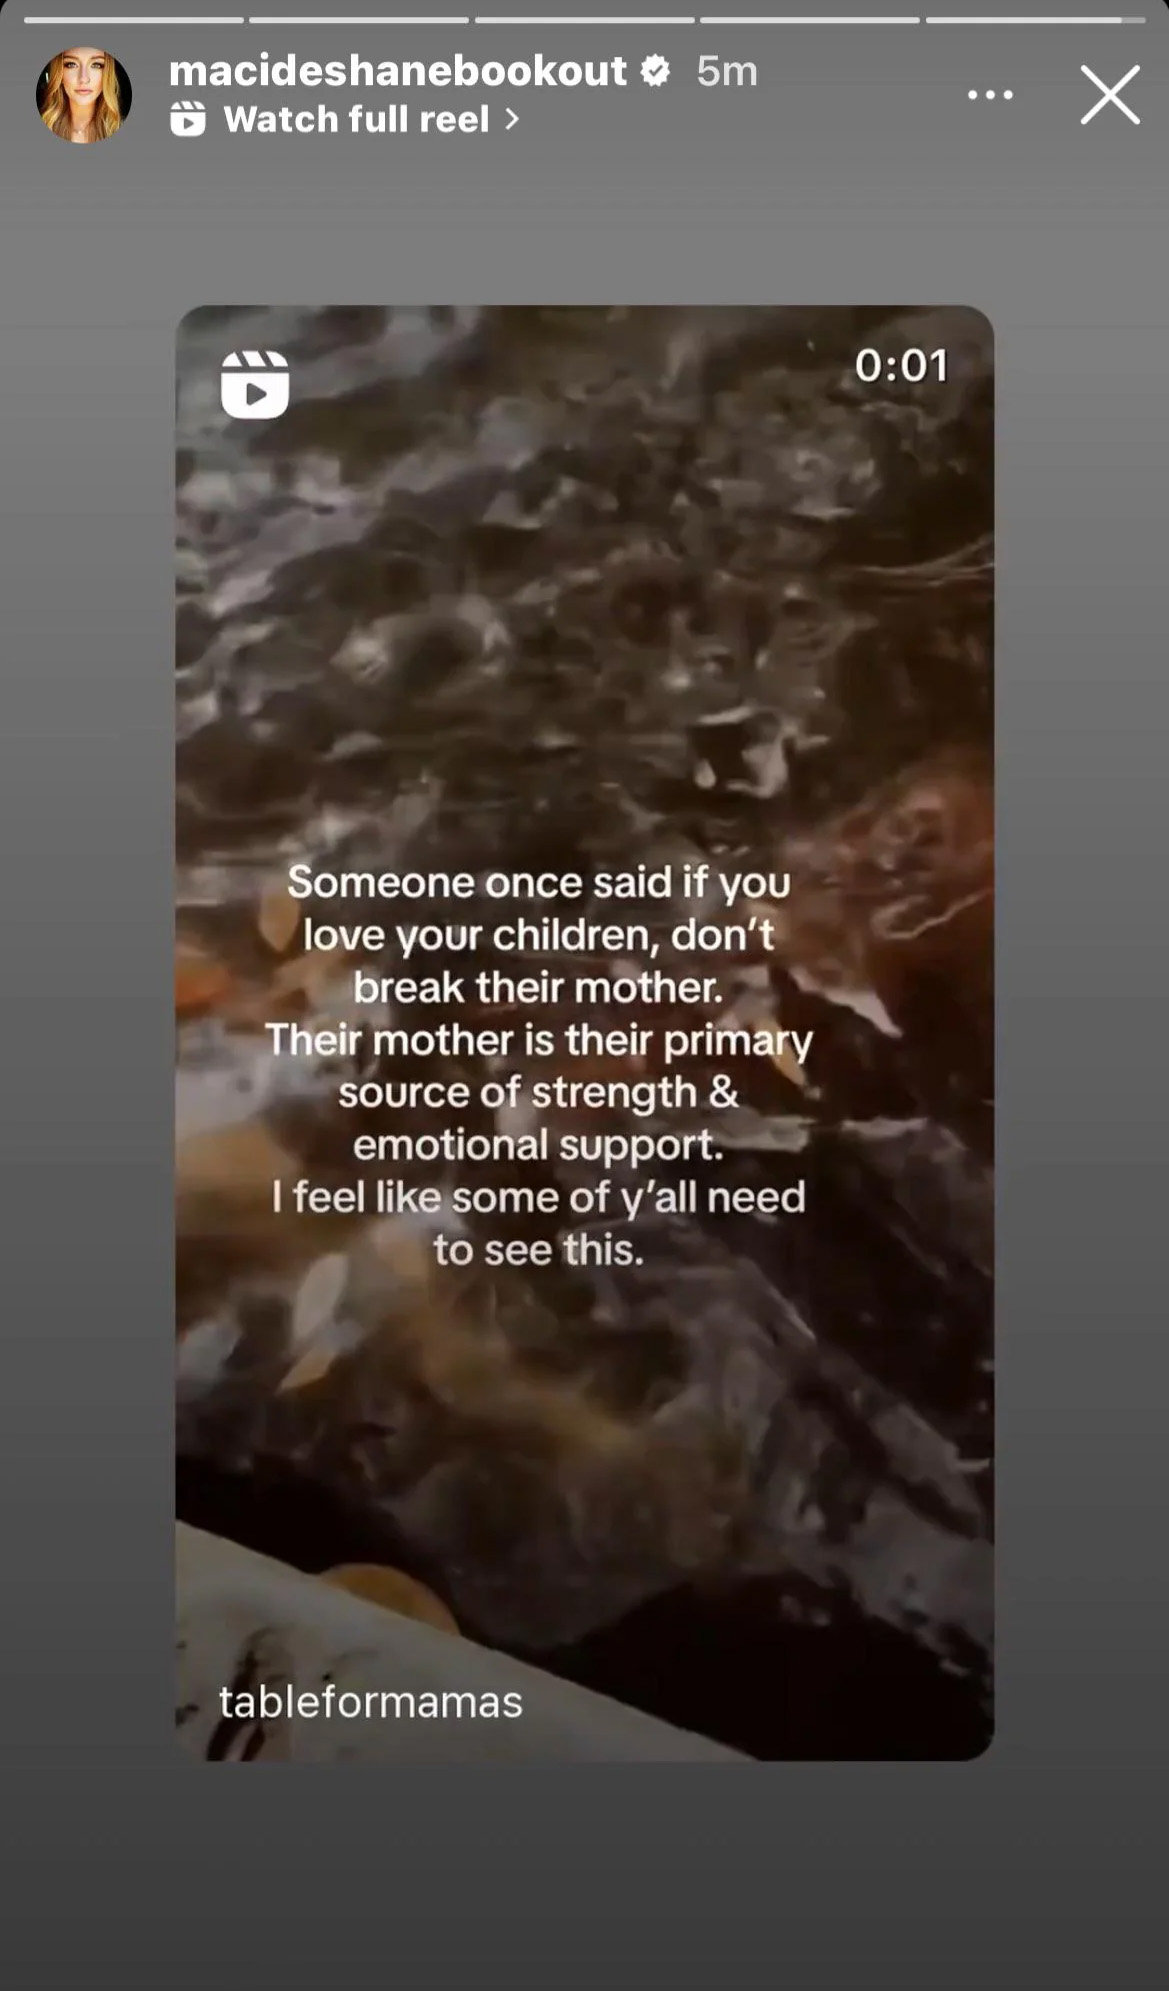 Maci shared a cryptic message about being broken